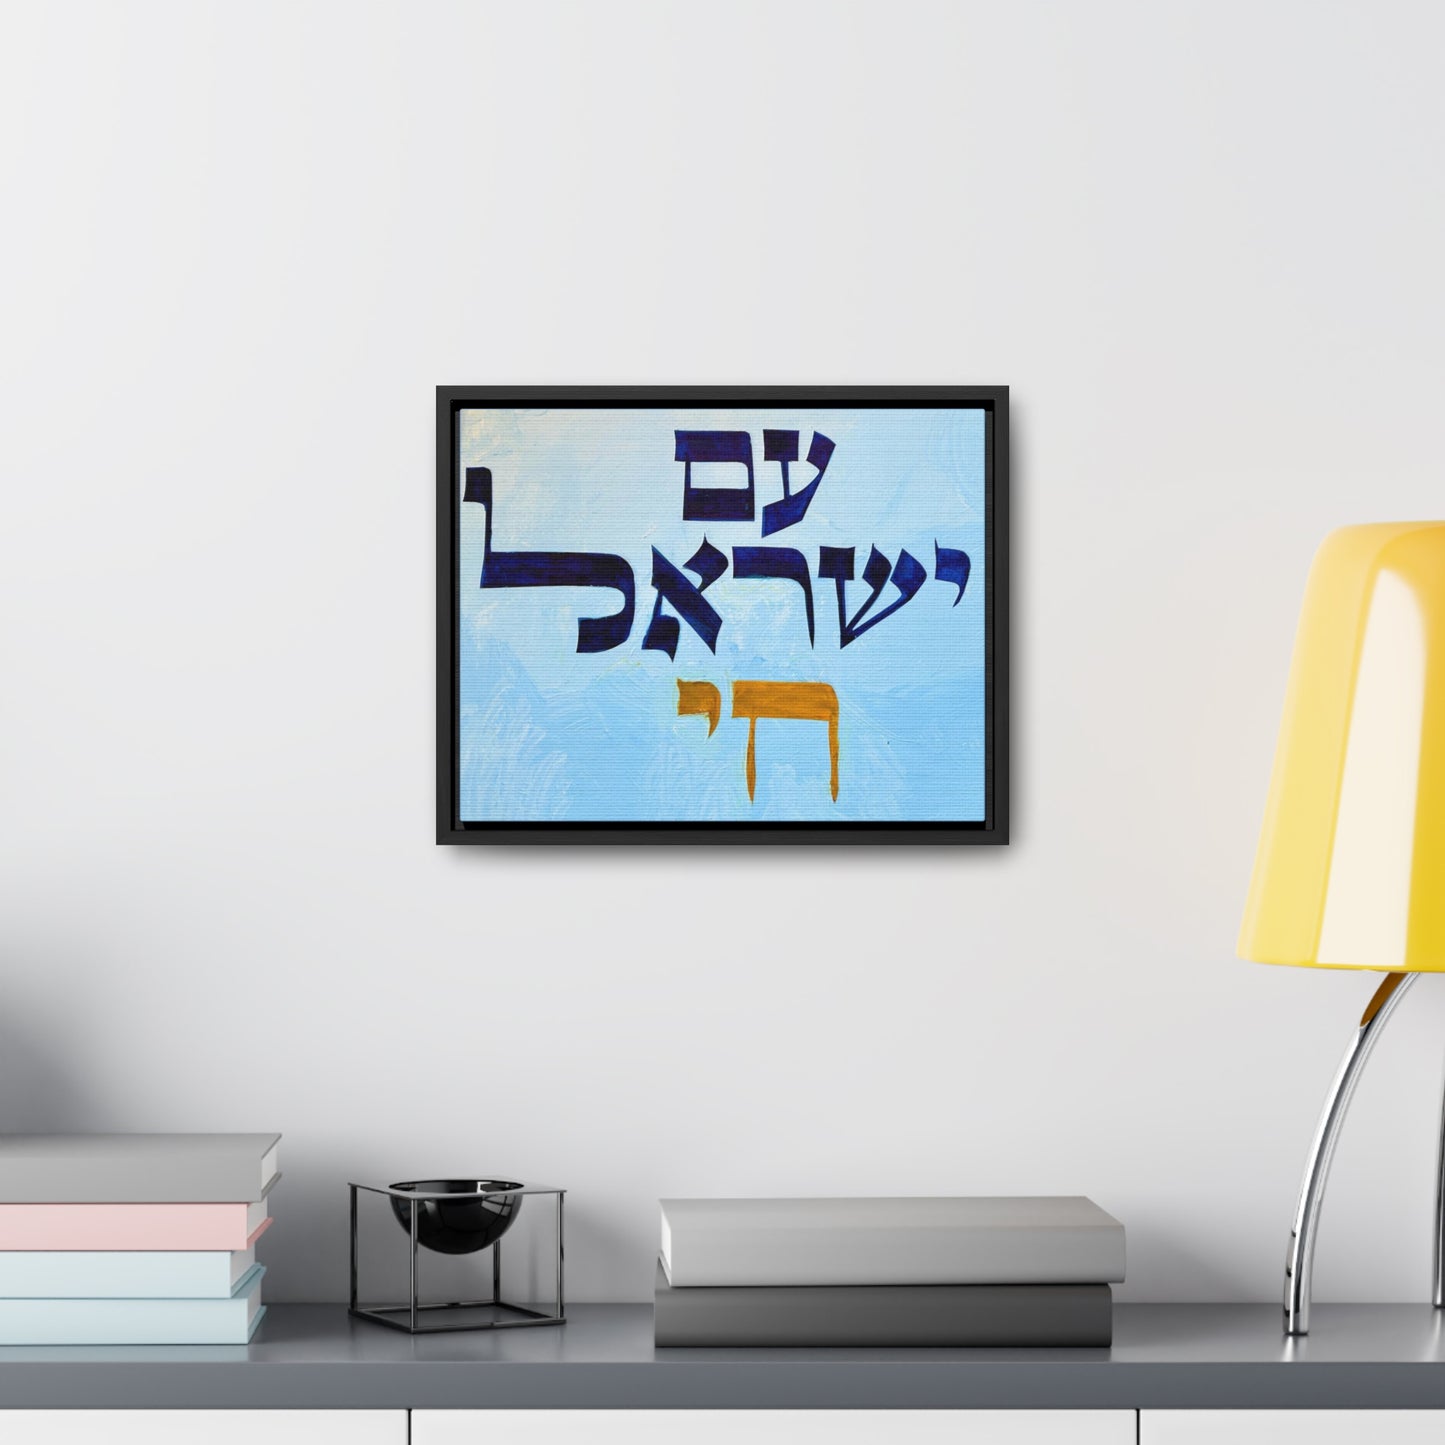 "Am Yisrael Chai" by Dov Laimon Gallery Wrapped Canvas Print in Frame